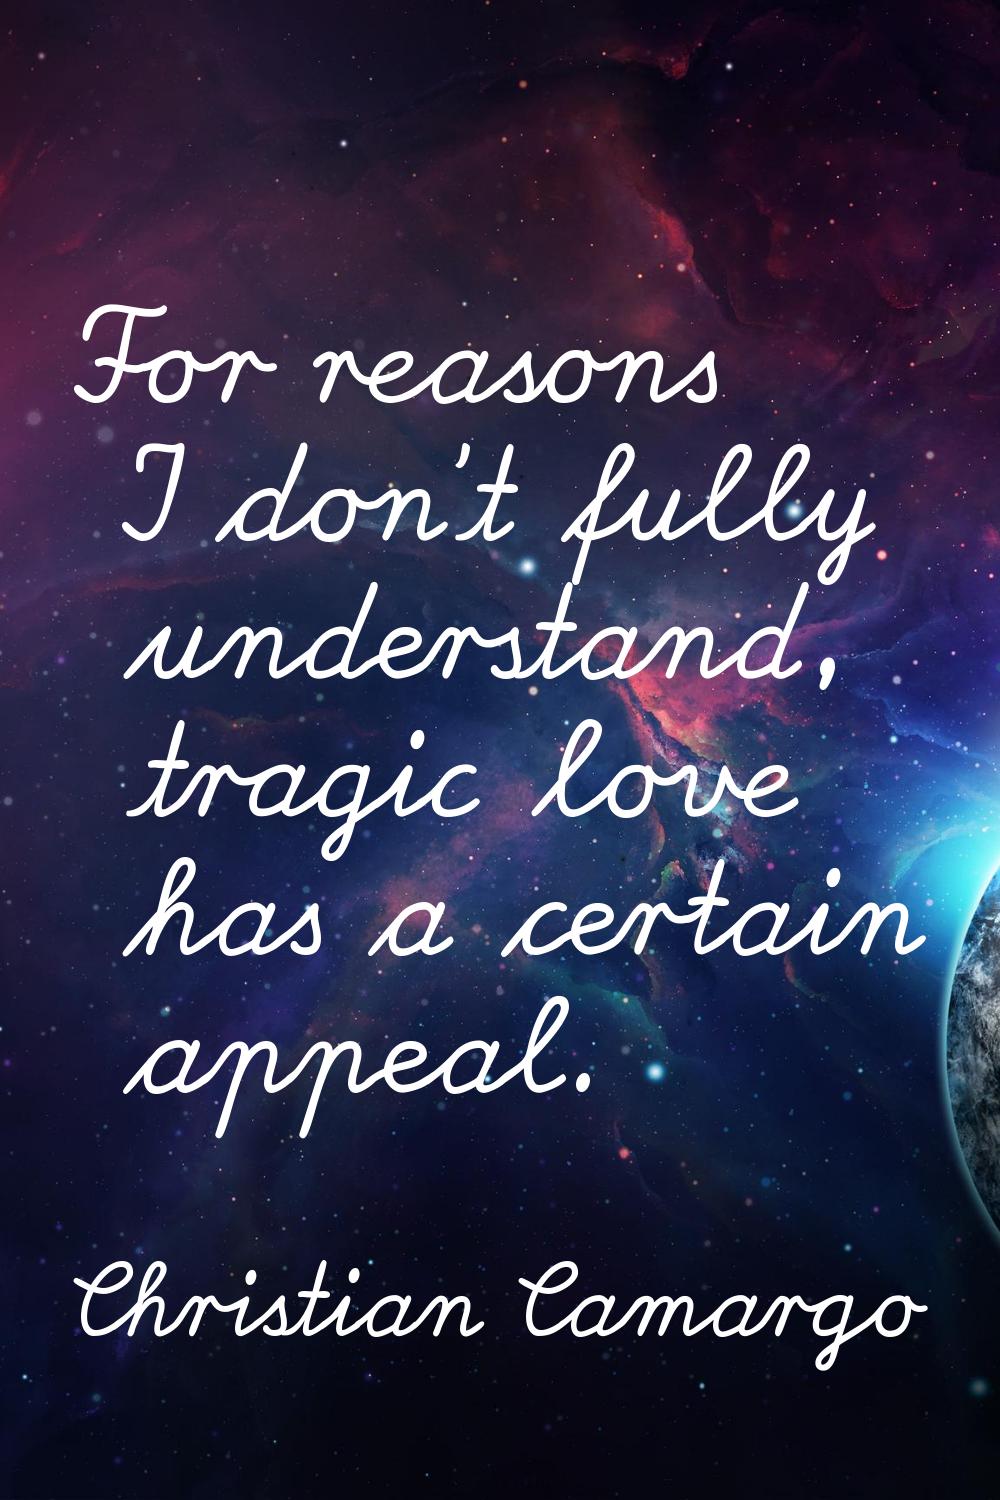 For reasons I don't fully understand, tragic love has a certain appeal.